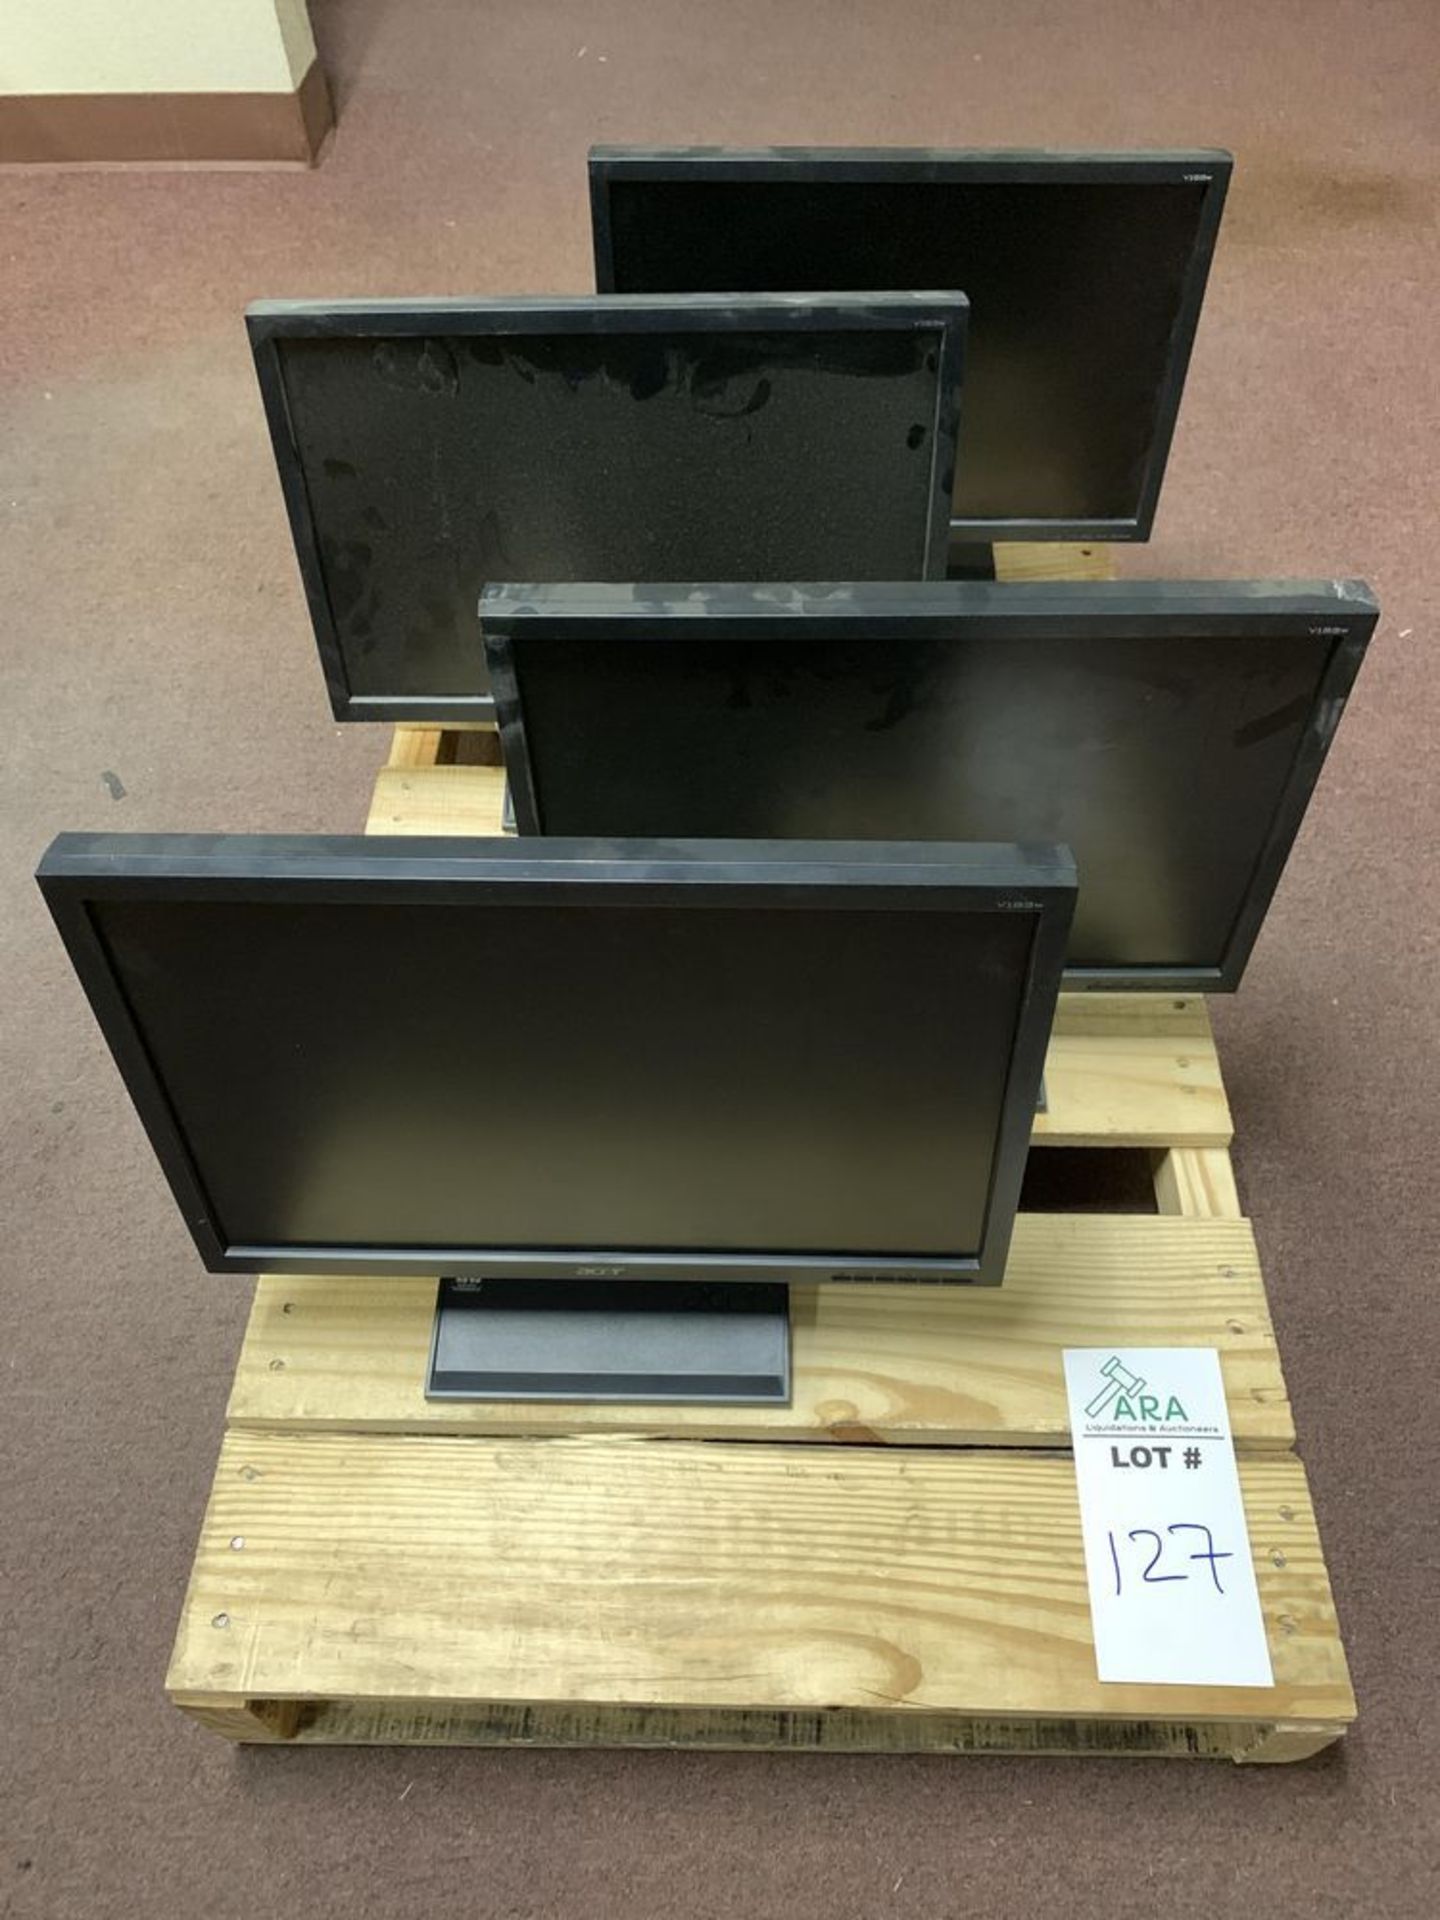 4 ACER V193W MONITORS. ALL ITEMS ARE SOLD AS IS UNTESTED BUT CAME FROM A WORKING ENVIRONMENT. NOT